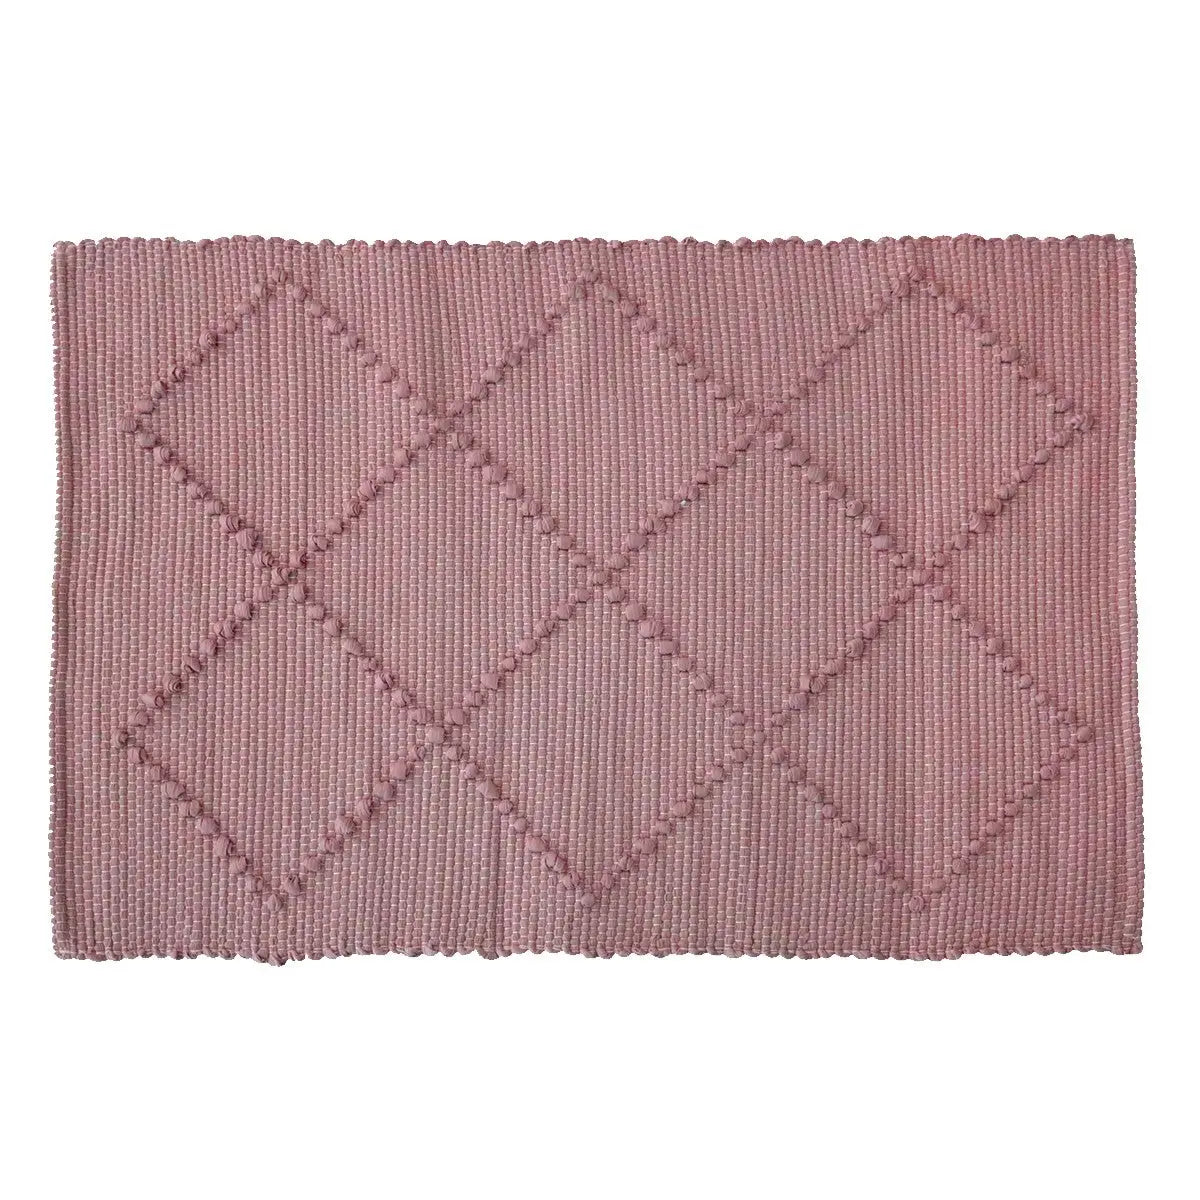 Meixedo Handwoven Rug From Upcycled Materials In Pink